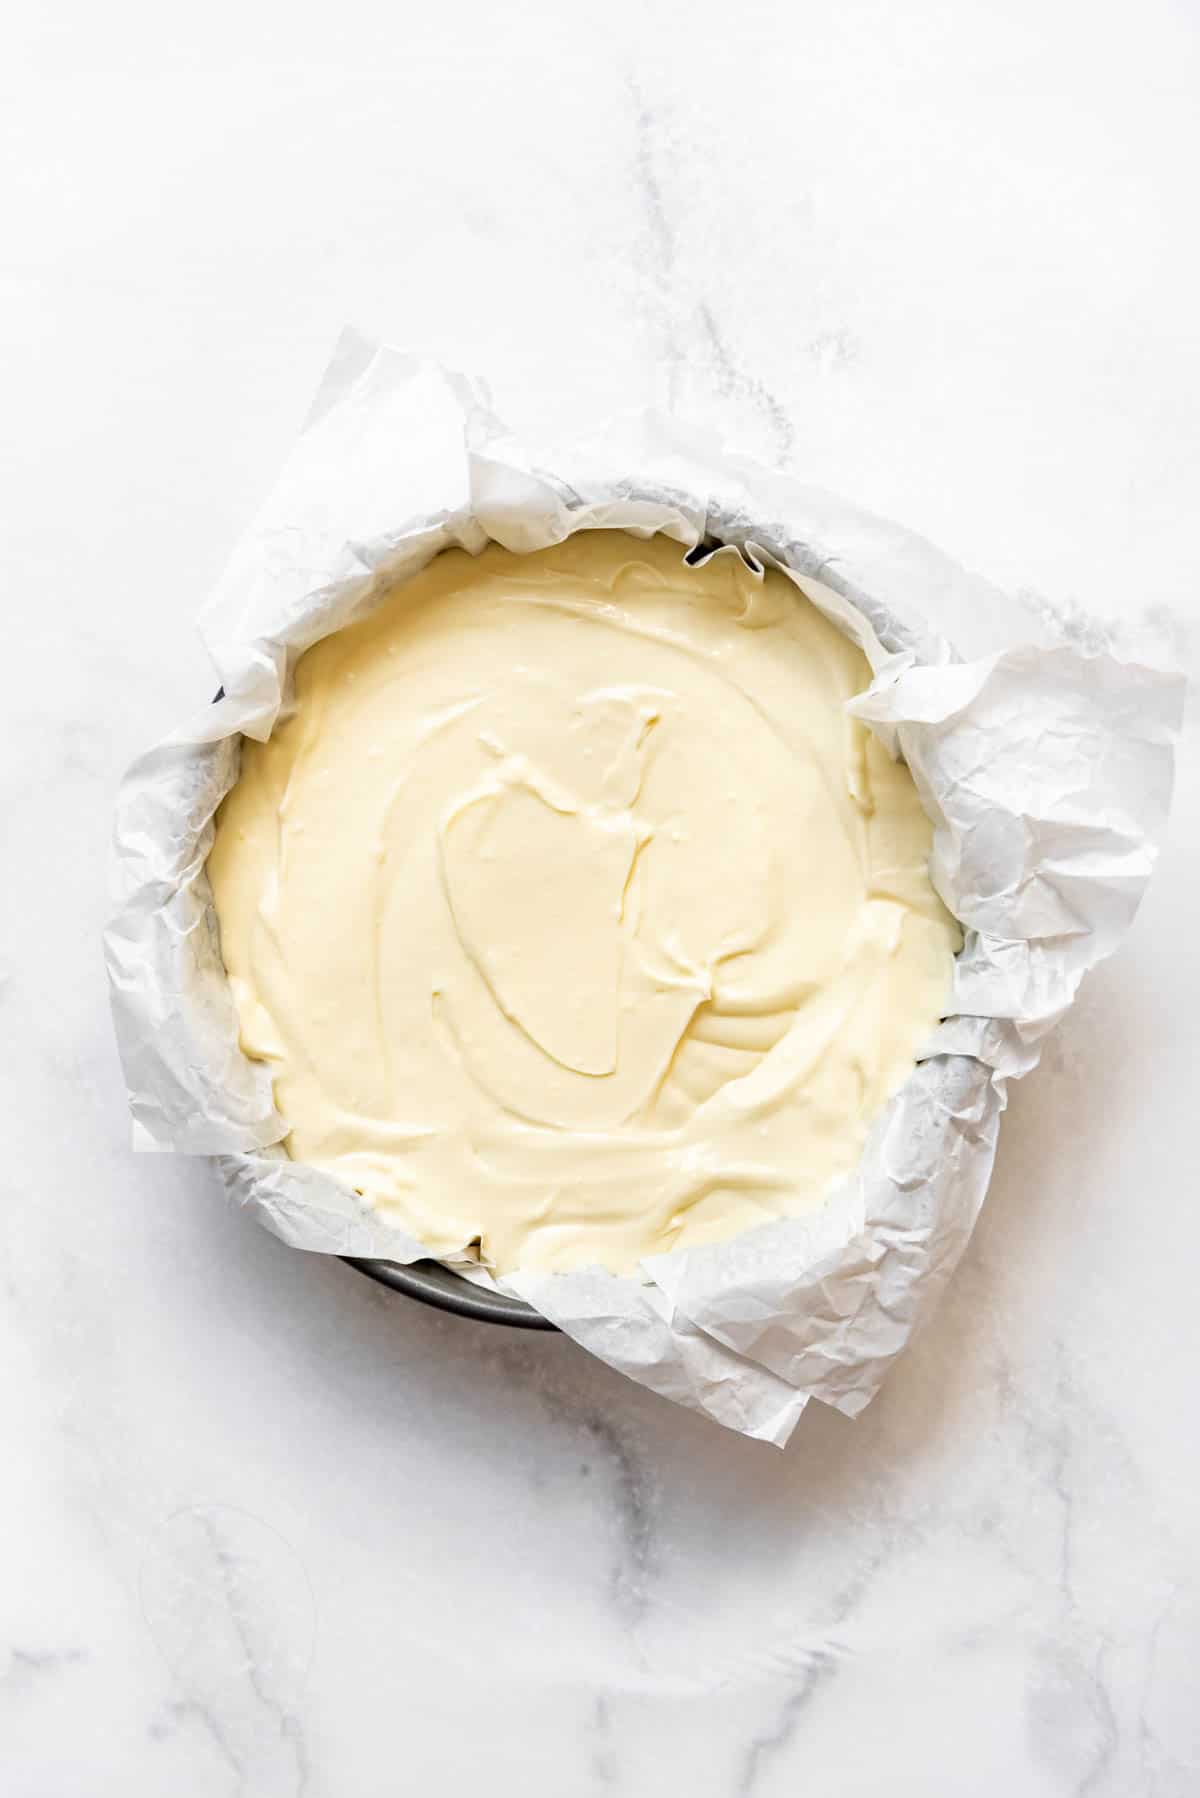 Basque cheesecake batter poured into a 9-inch springform pan lined with parchment paper.